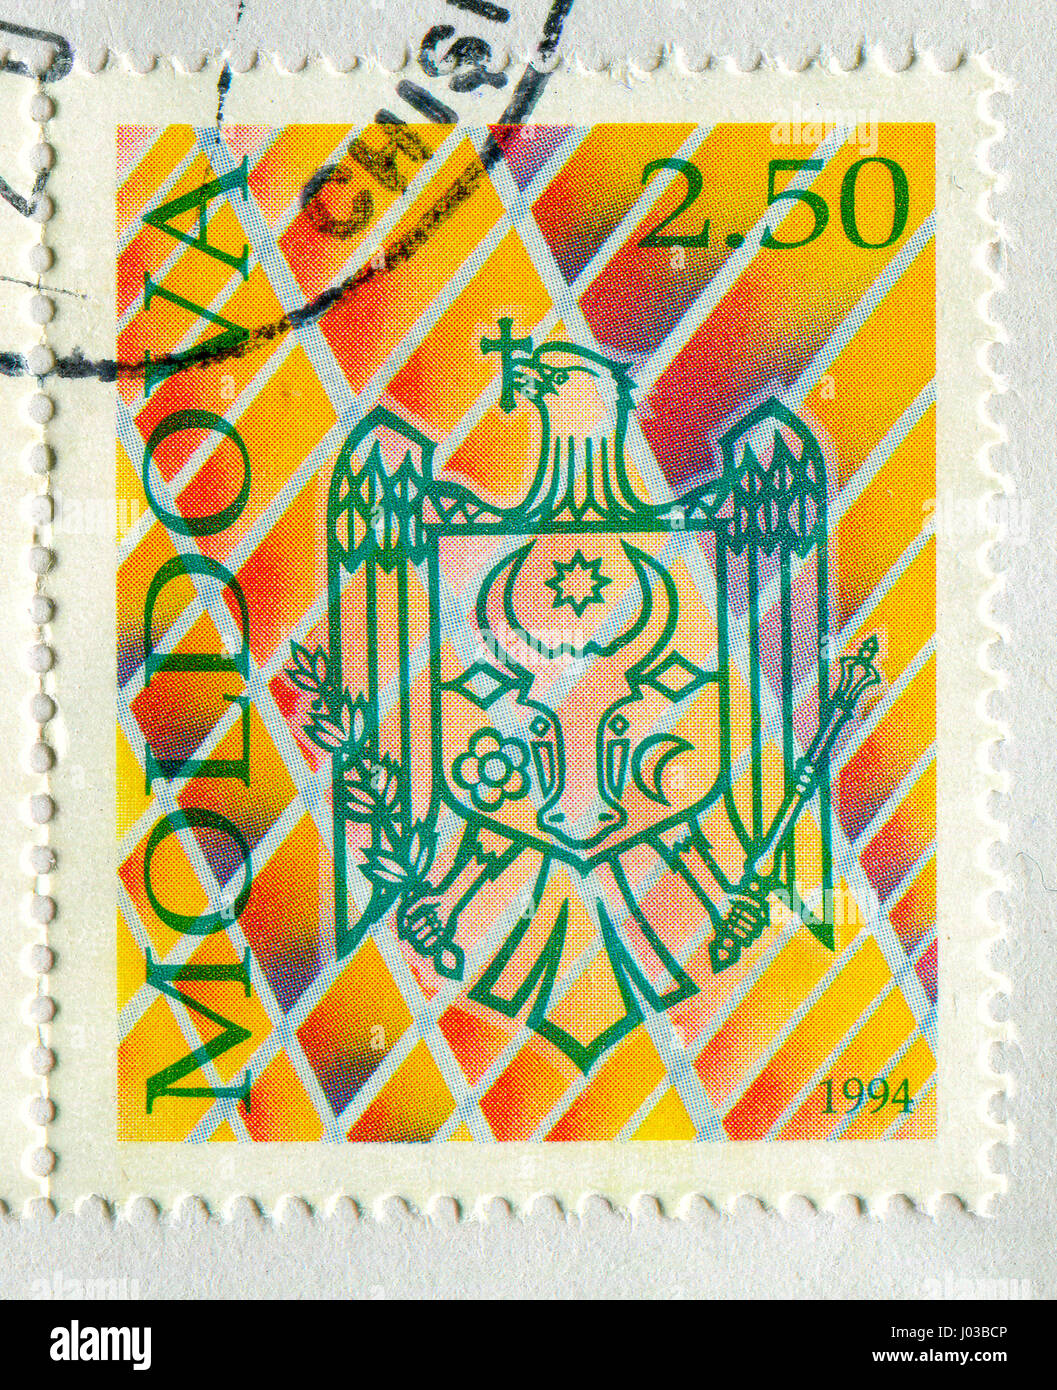 GOMEL, BELARUS, APRIL 7, 2017. Stamp printed in Moldova shows image of  The coat of arms Moldova, circa 1994. Stock Photo